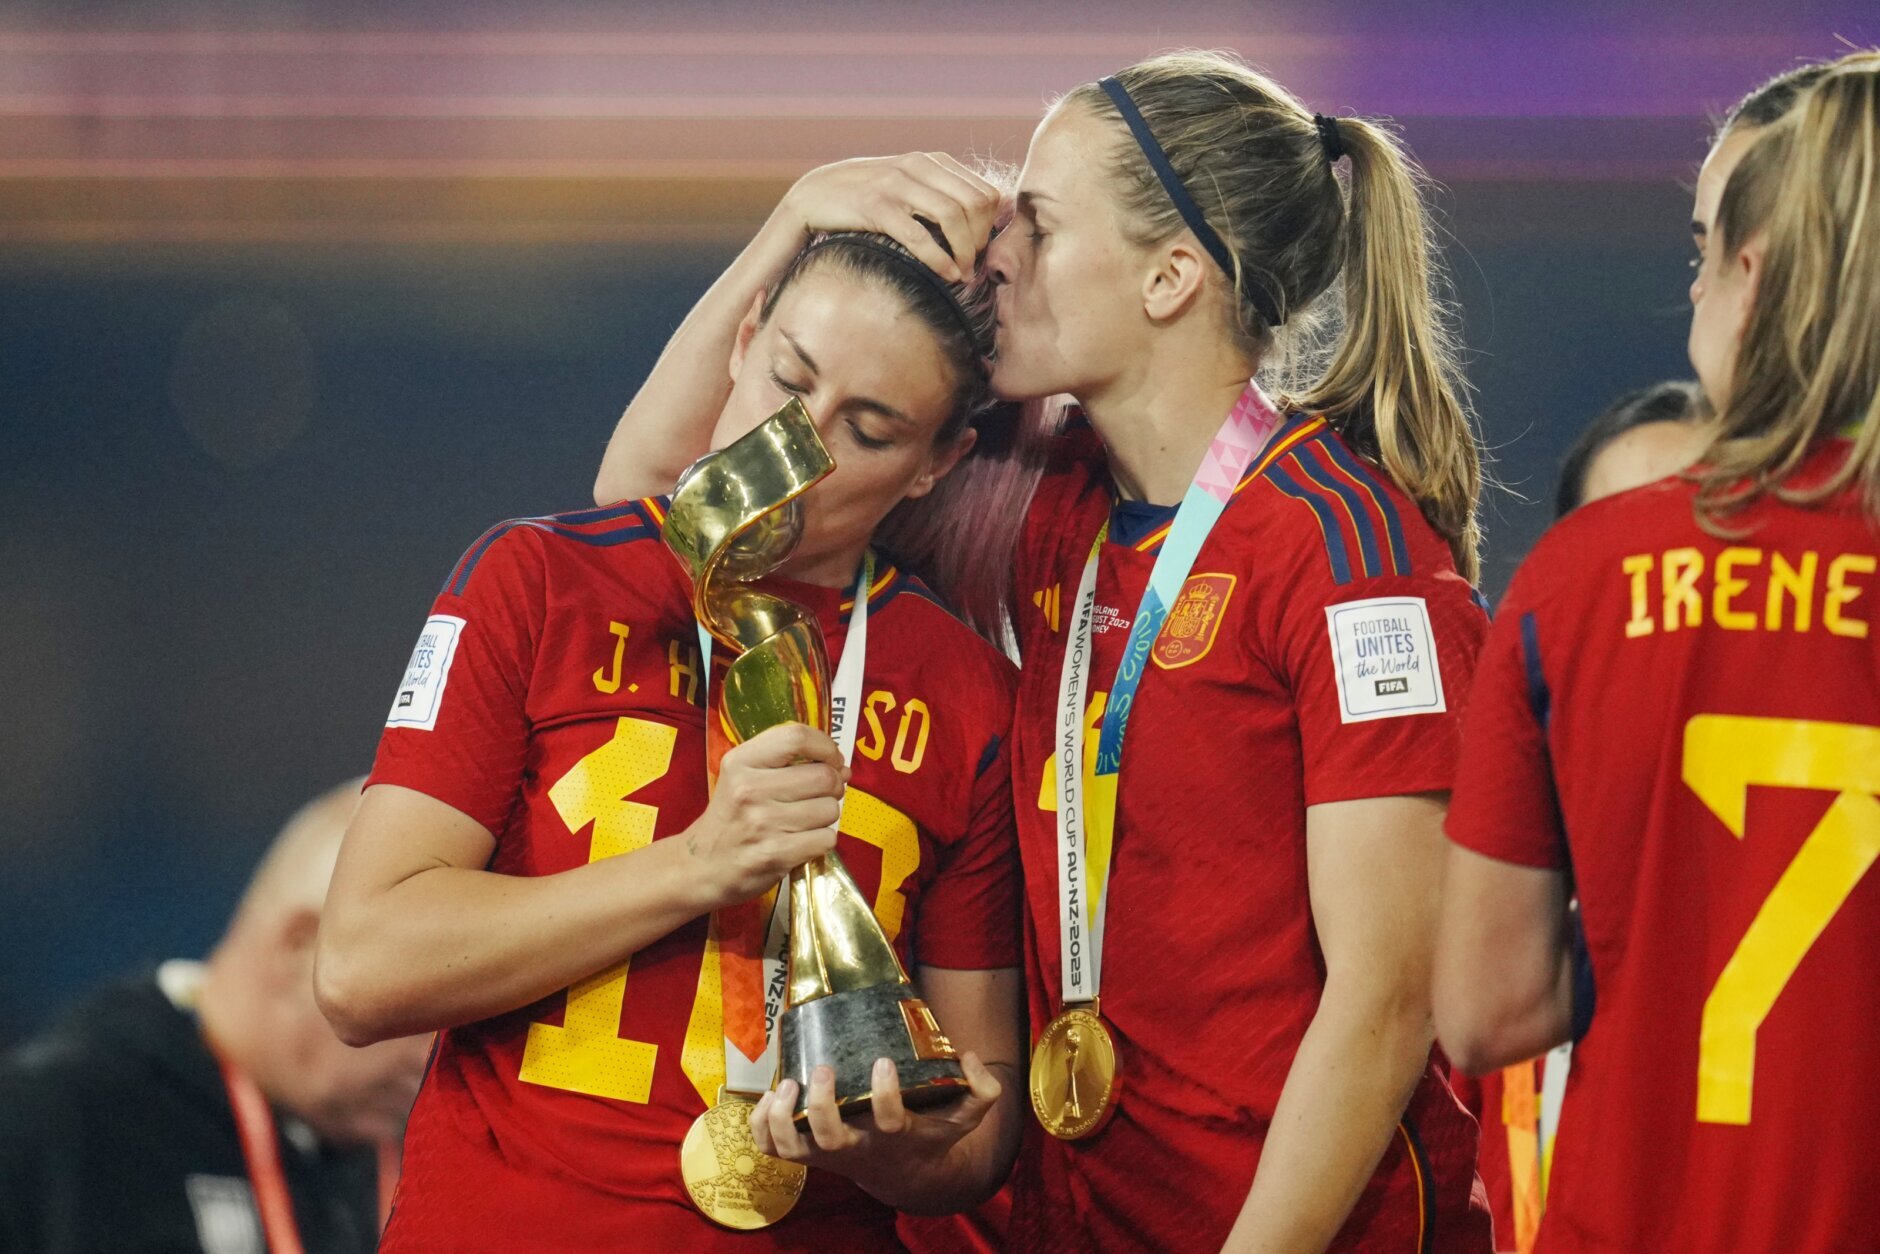 Alexia Putellas: World Cup winner says 'FIFA should take note' of